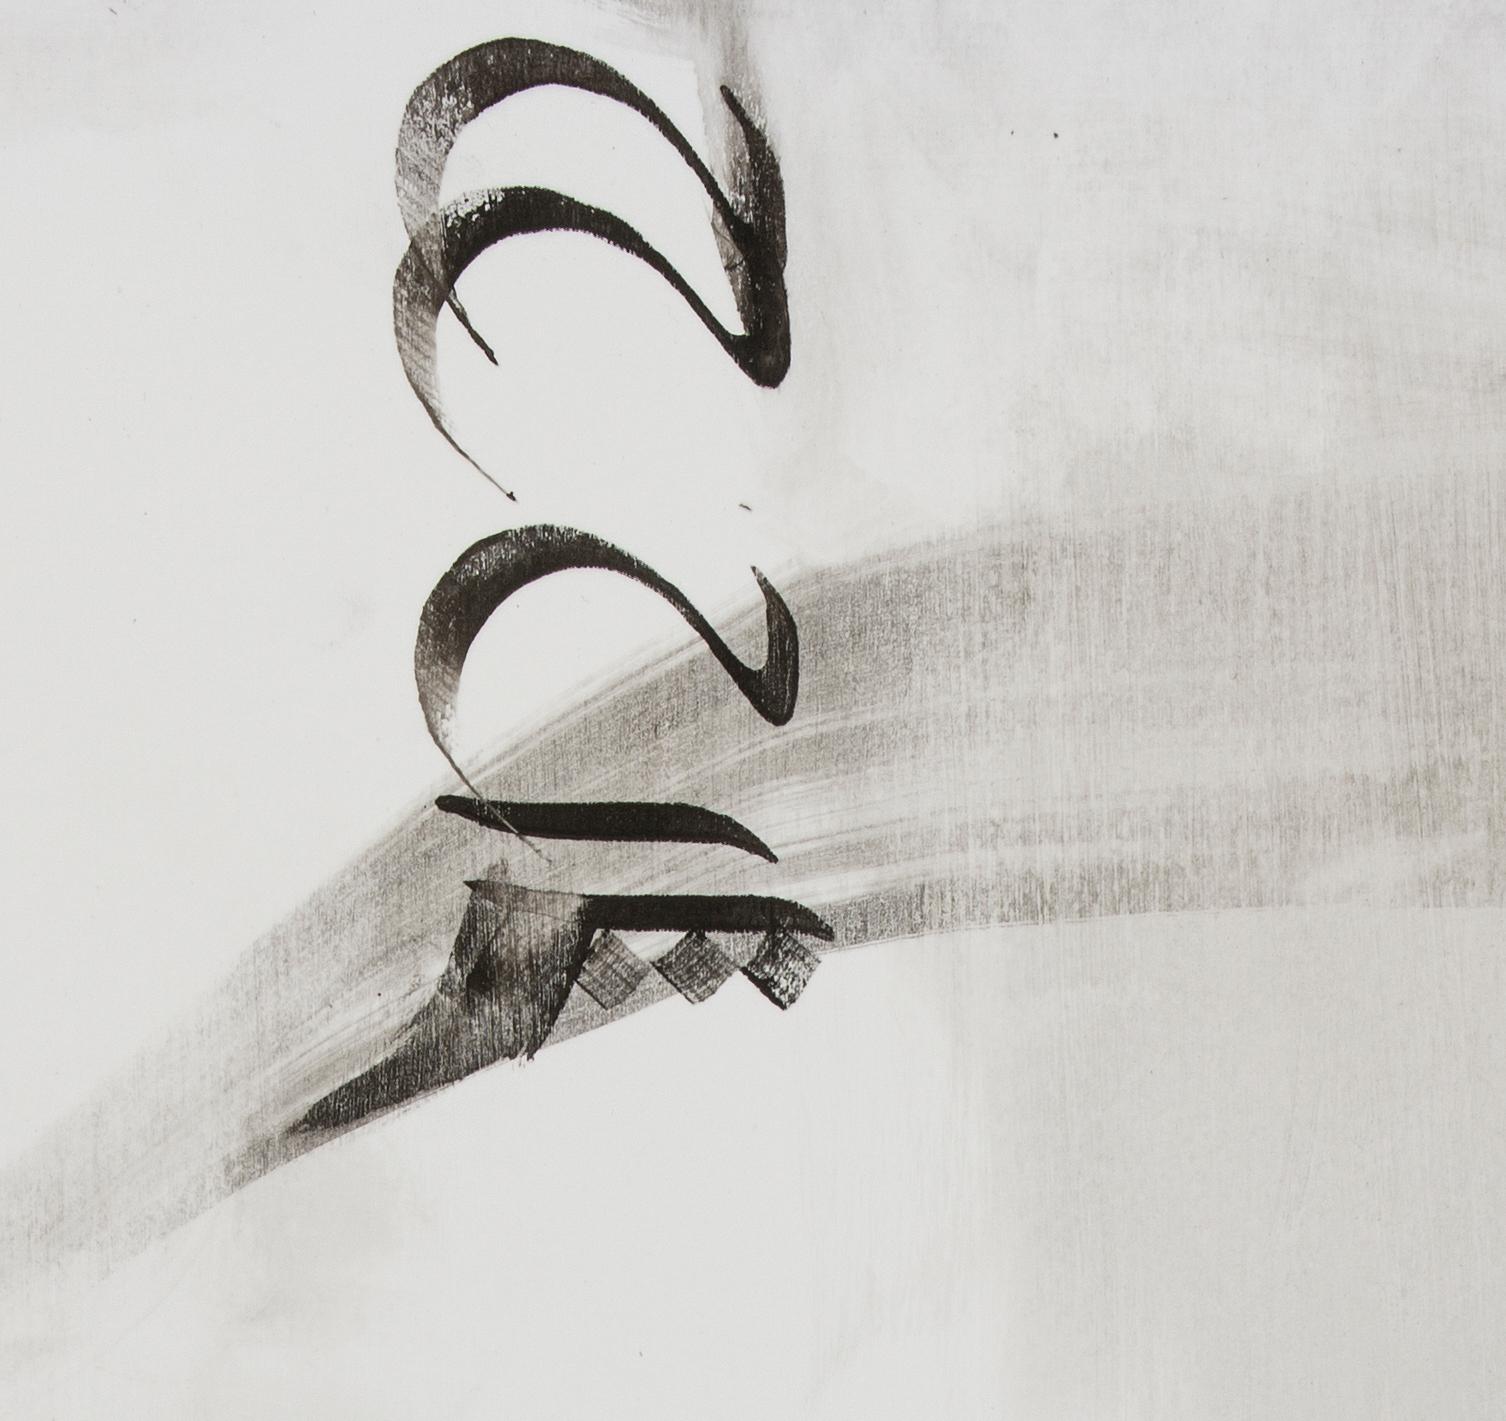 Etude 8 - abstract calligraphy ink drawing / painting on paper, in black & white - Painting by Nazanin Moghbeli